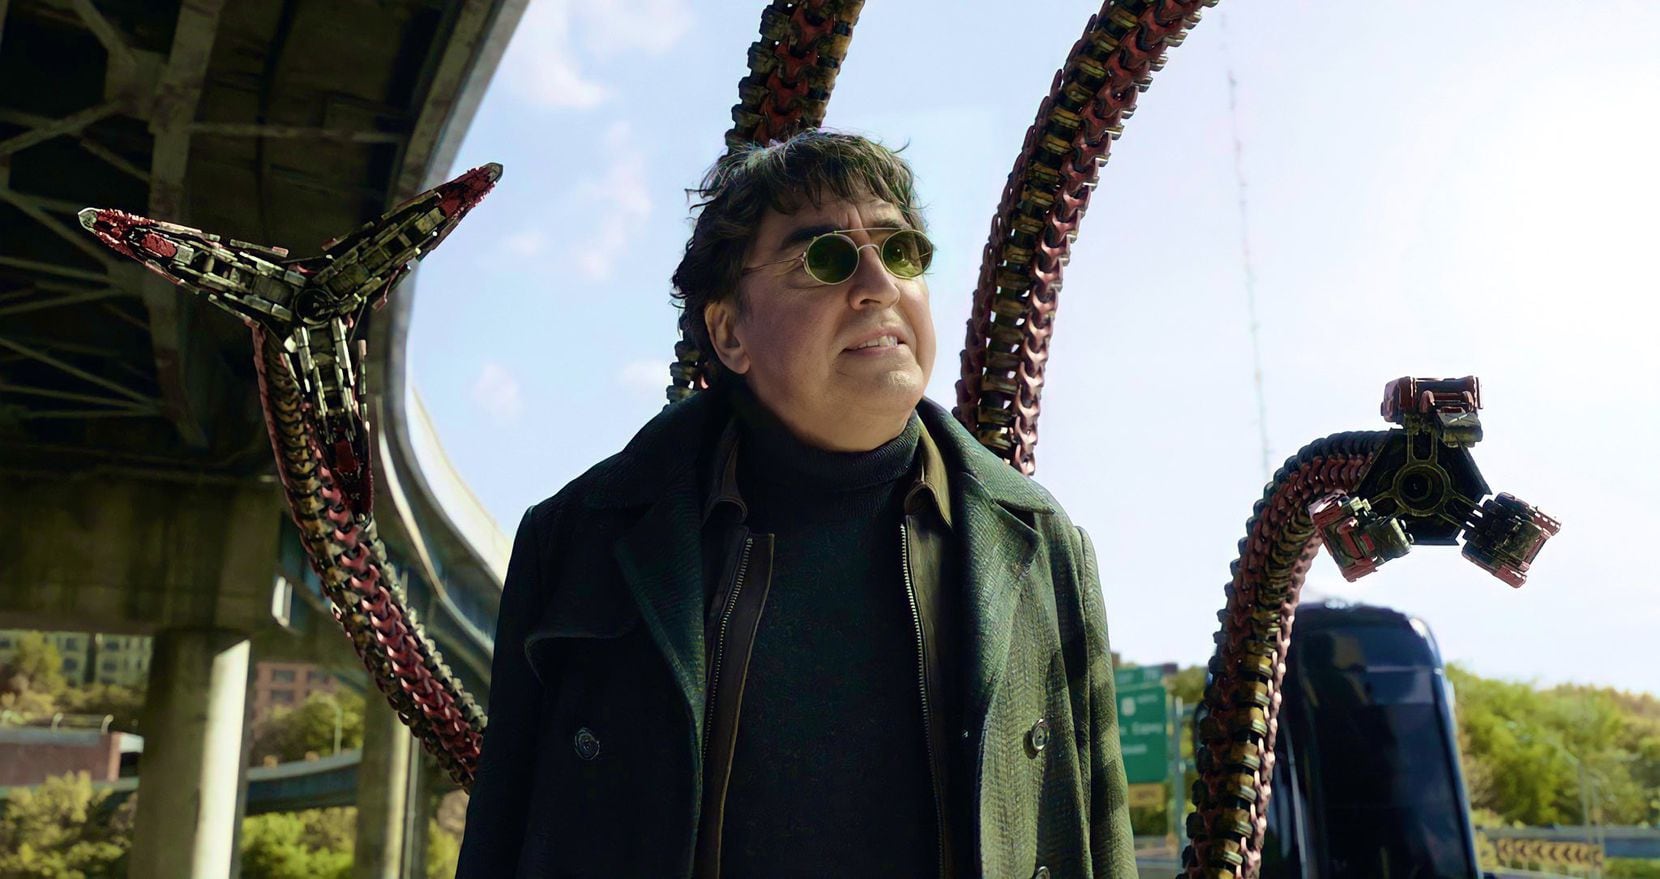 Alfred Molina stars as Doctor Octopus in "Spider-Man: No Way Home."